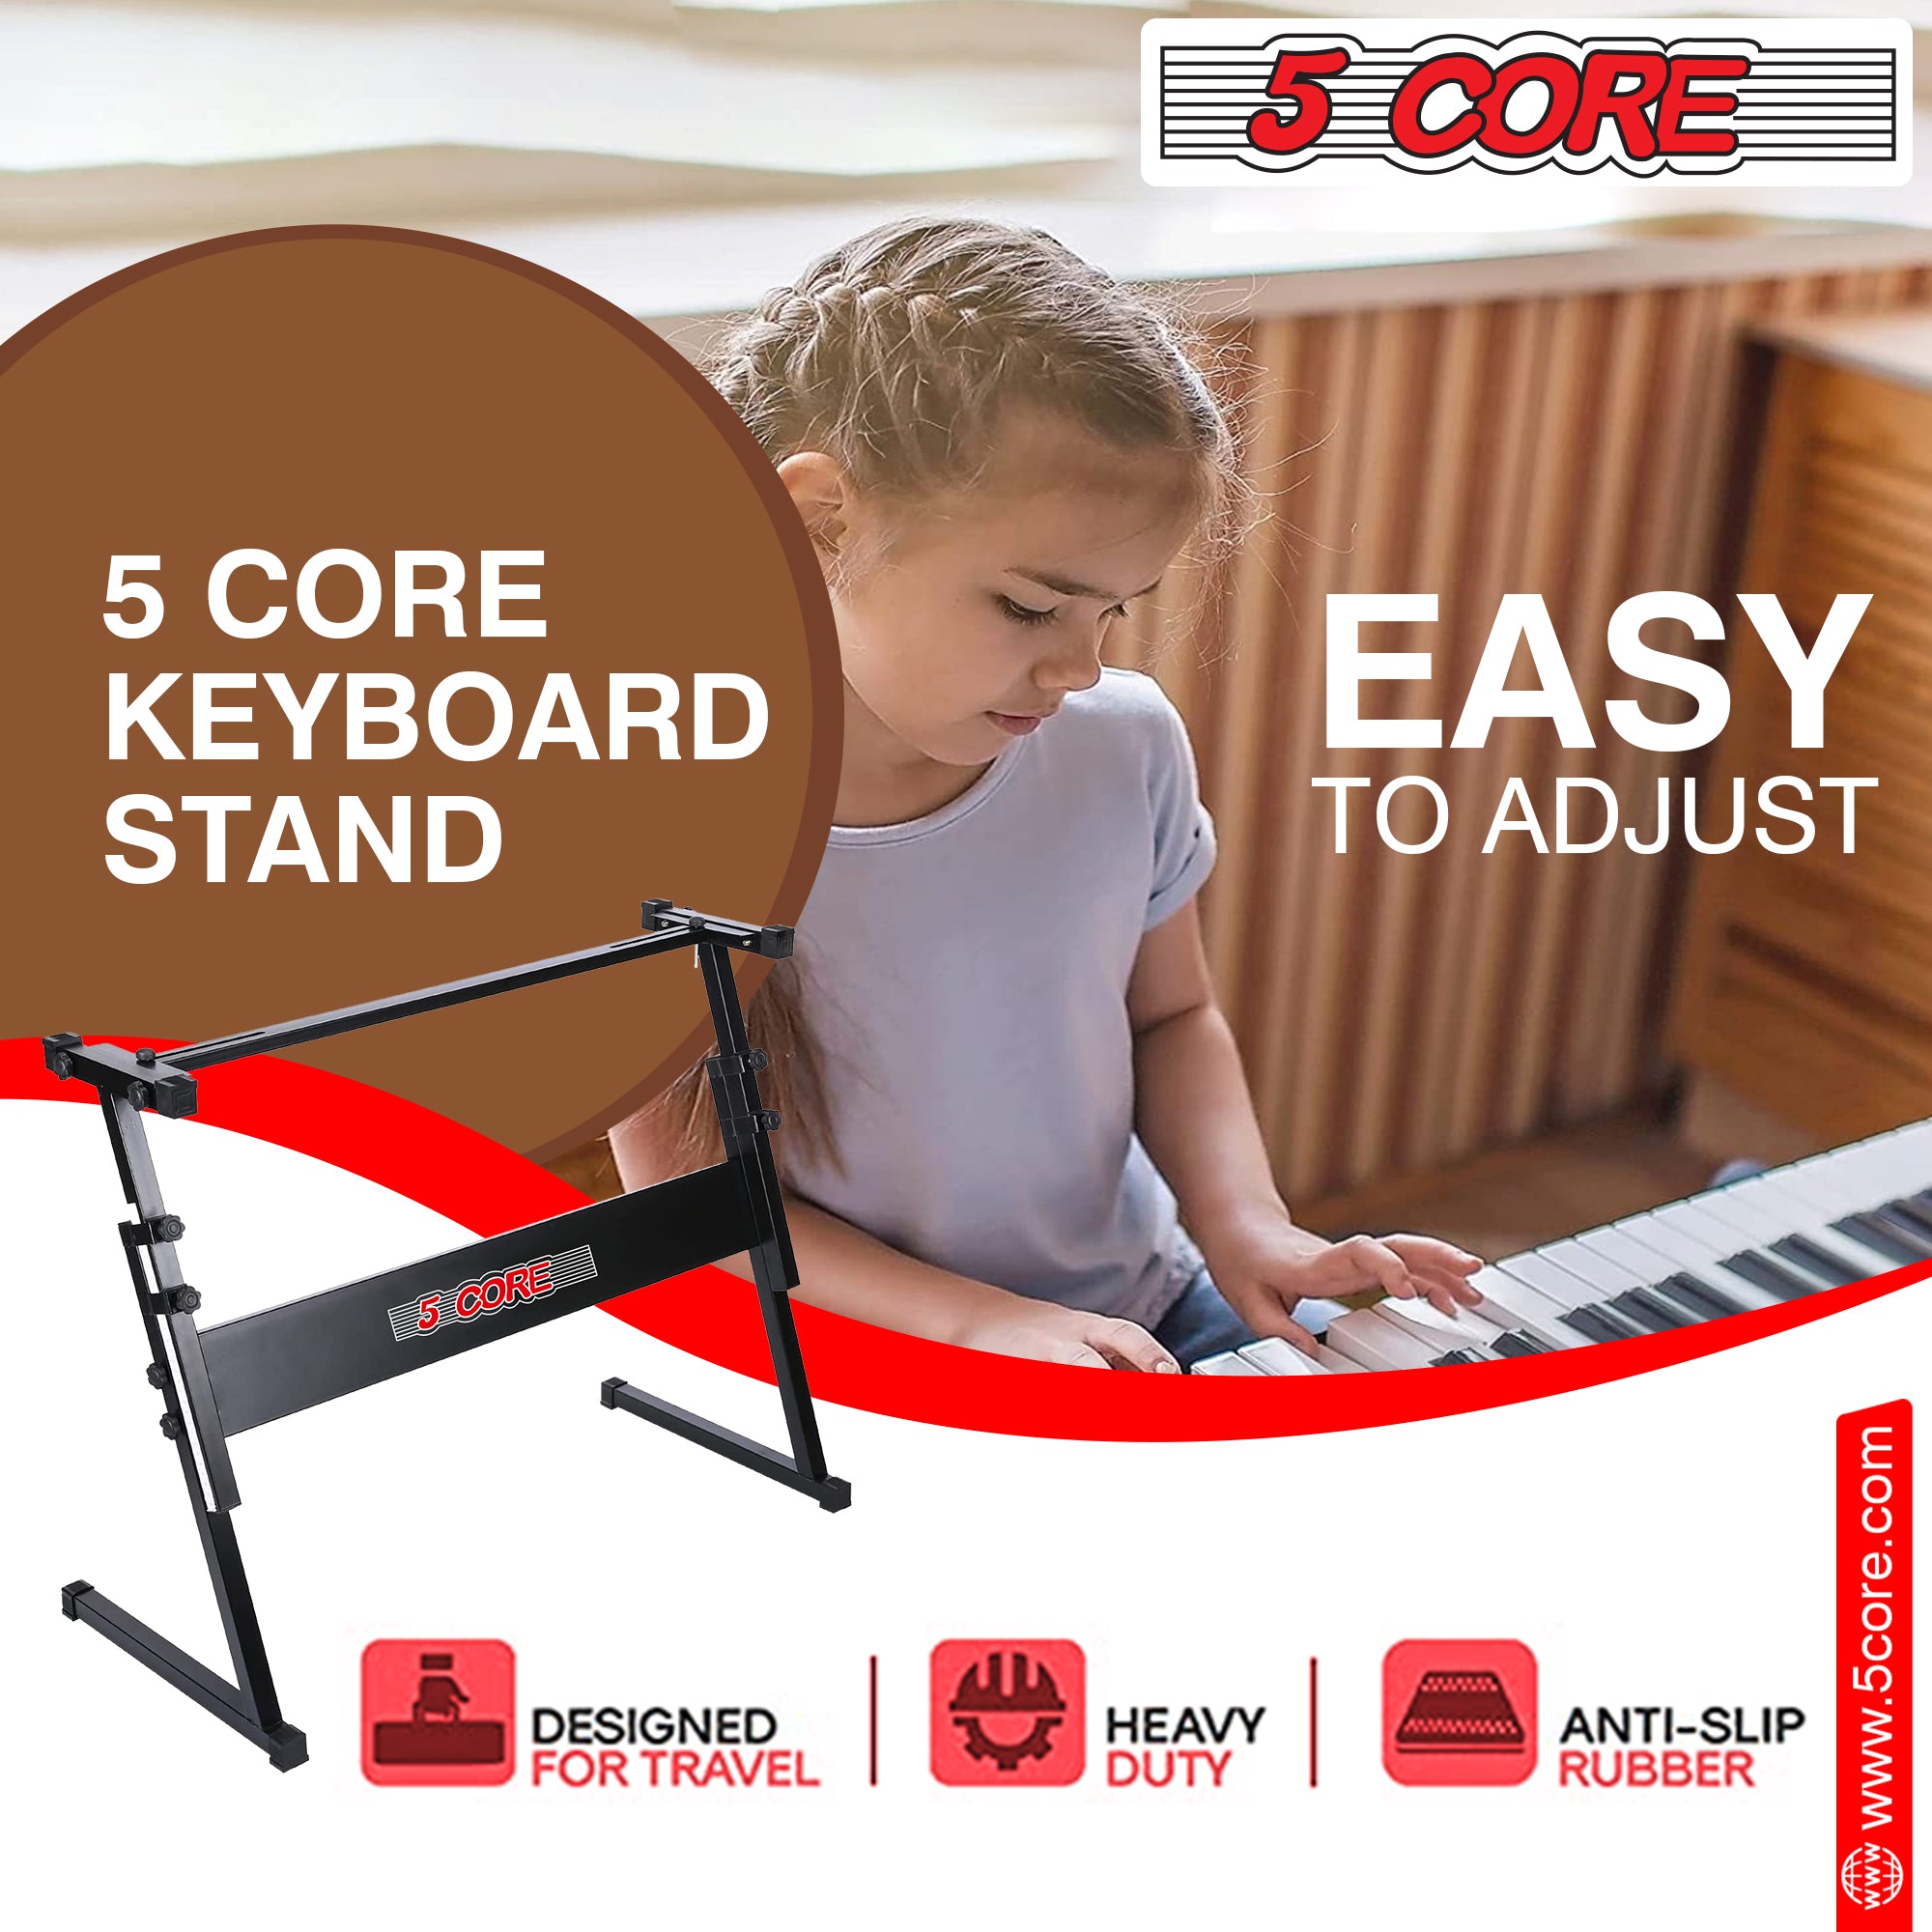 easy to adjust keyboard stand